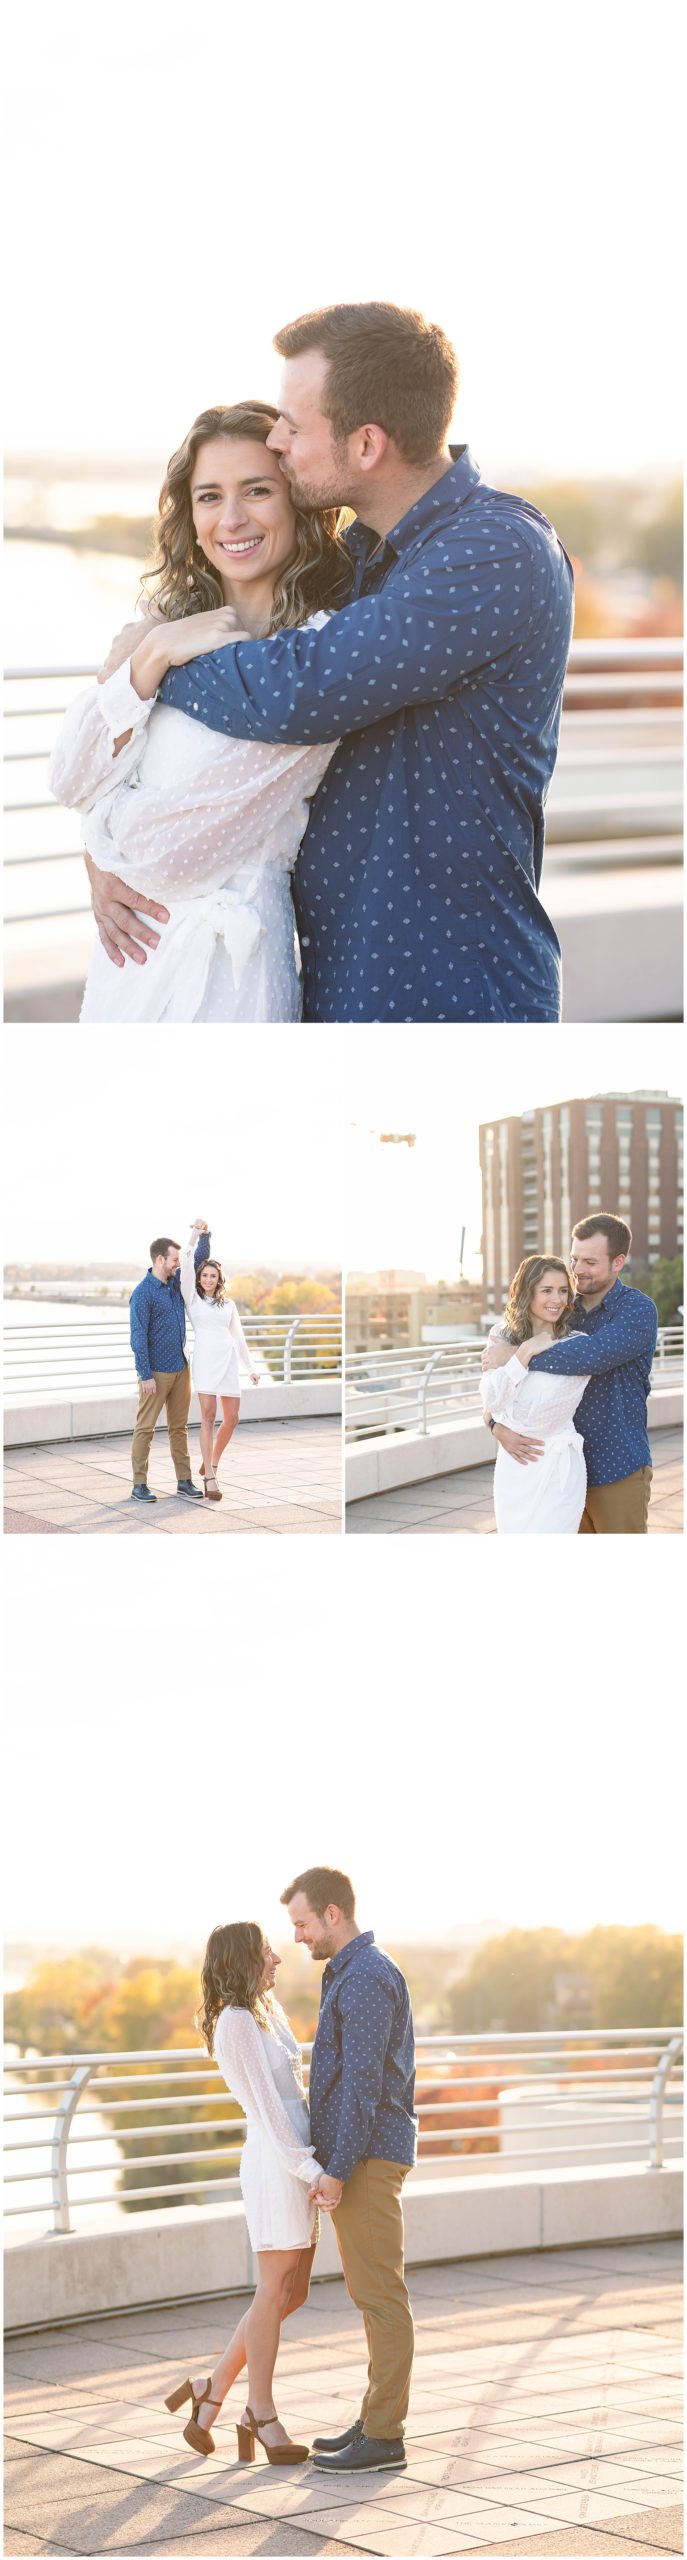 Rooftop Engagement Photos in Madison WI 